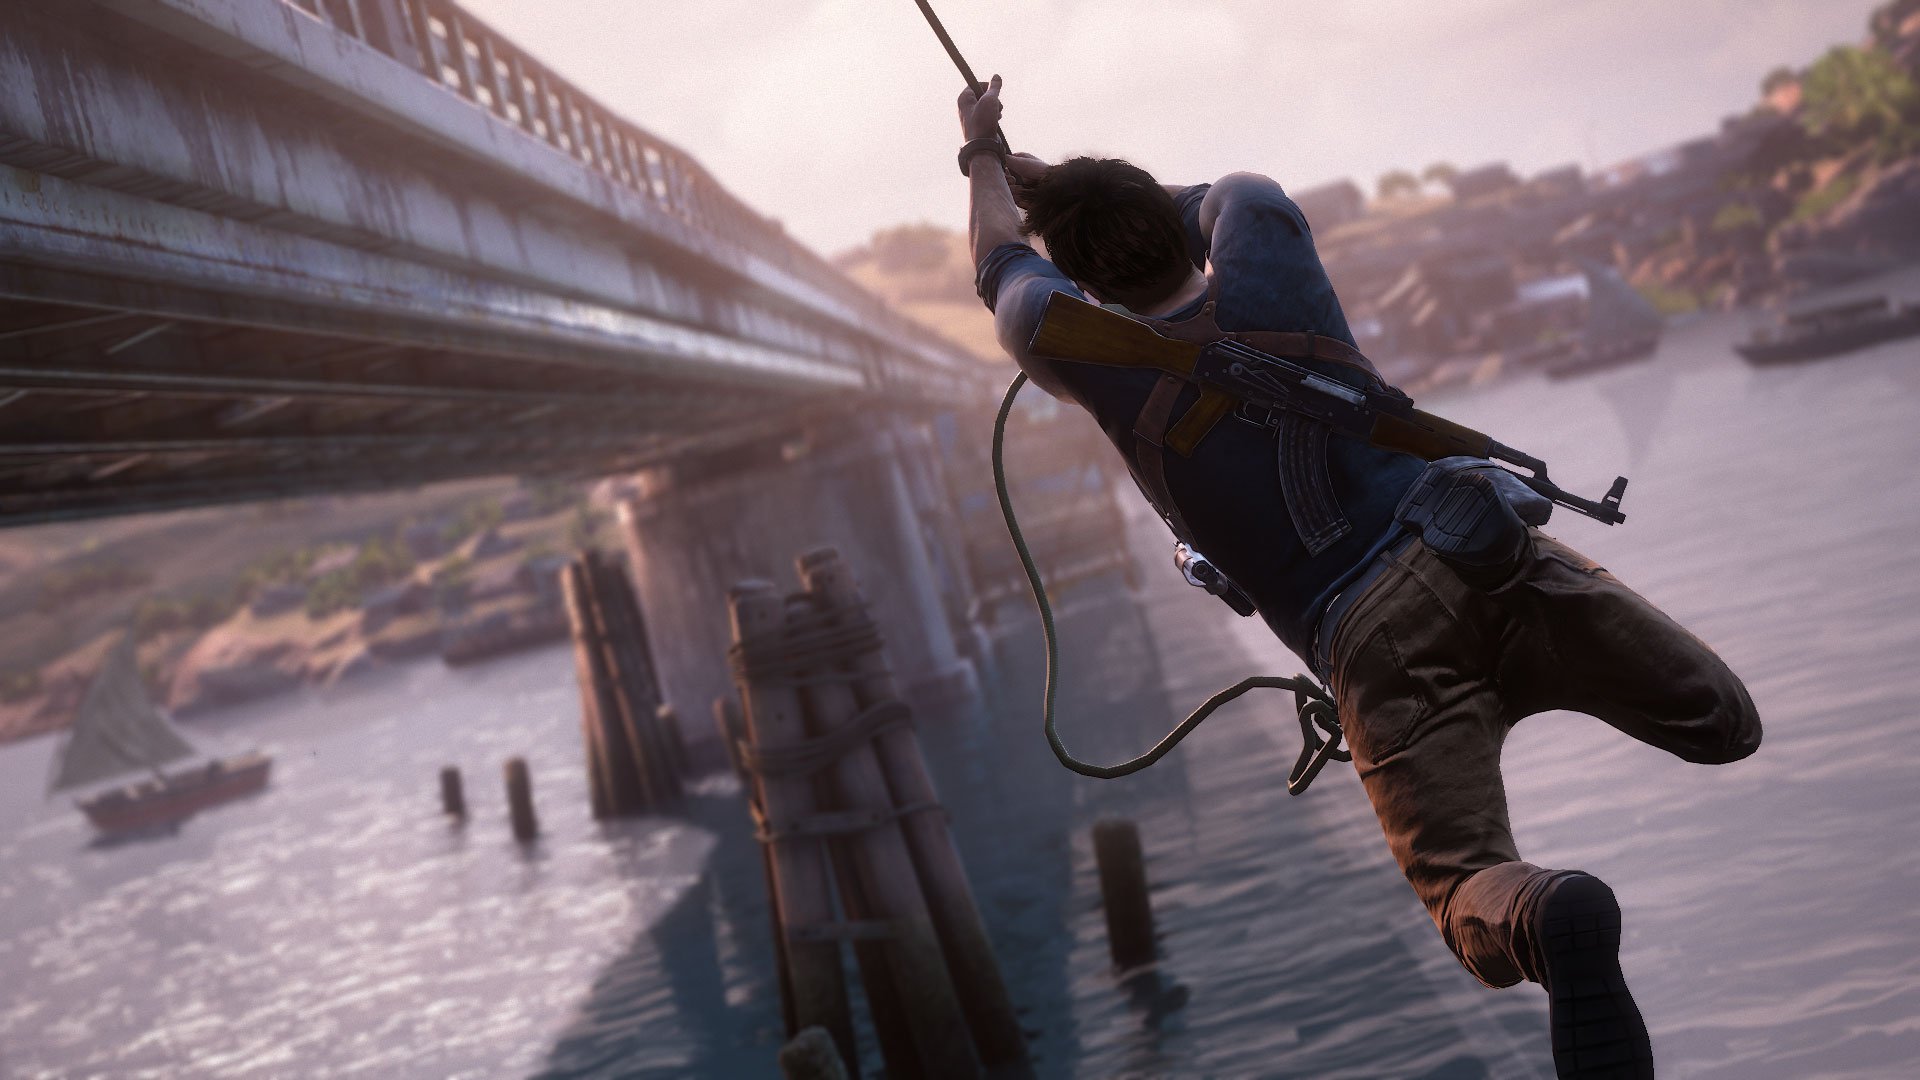 Uncharted 4: A Thief's End Review (PS4) - ThisGenGaming